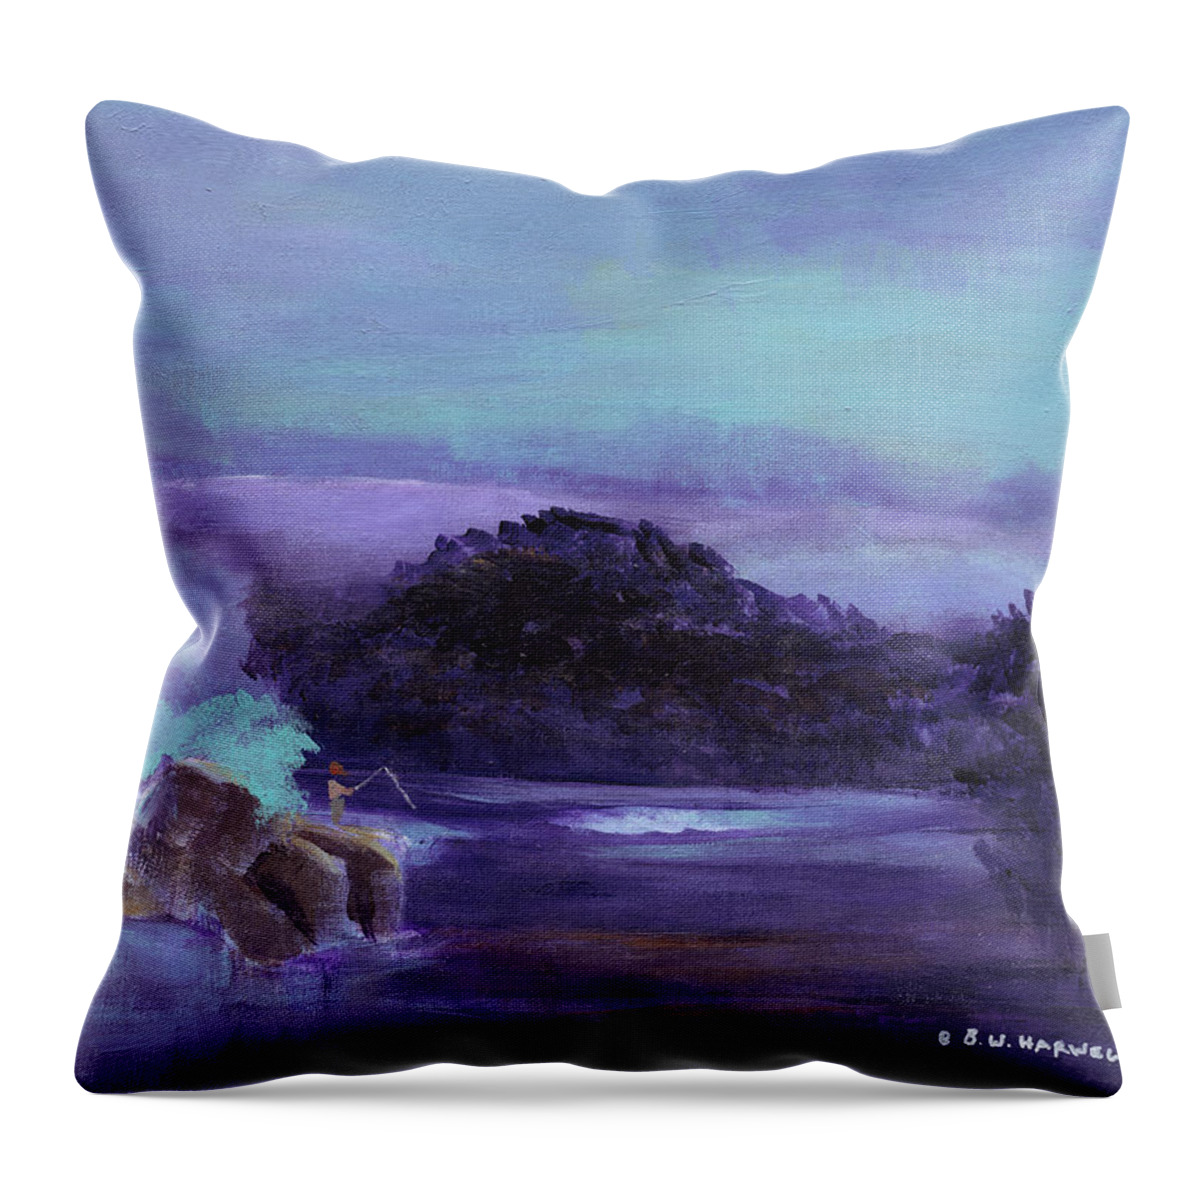 Landscape Throw Pillow featuring the painting Fly Fishing by Bettye Harwell